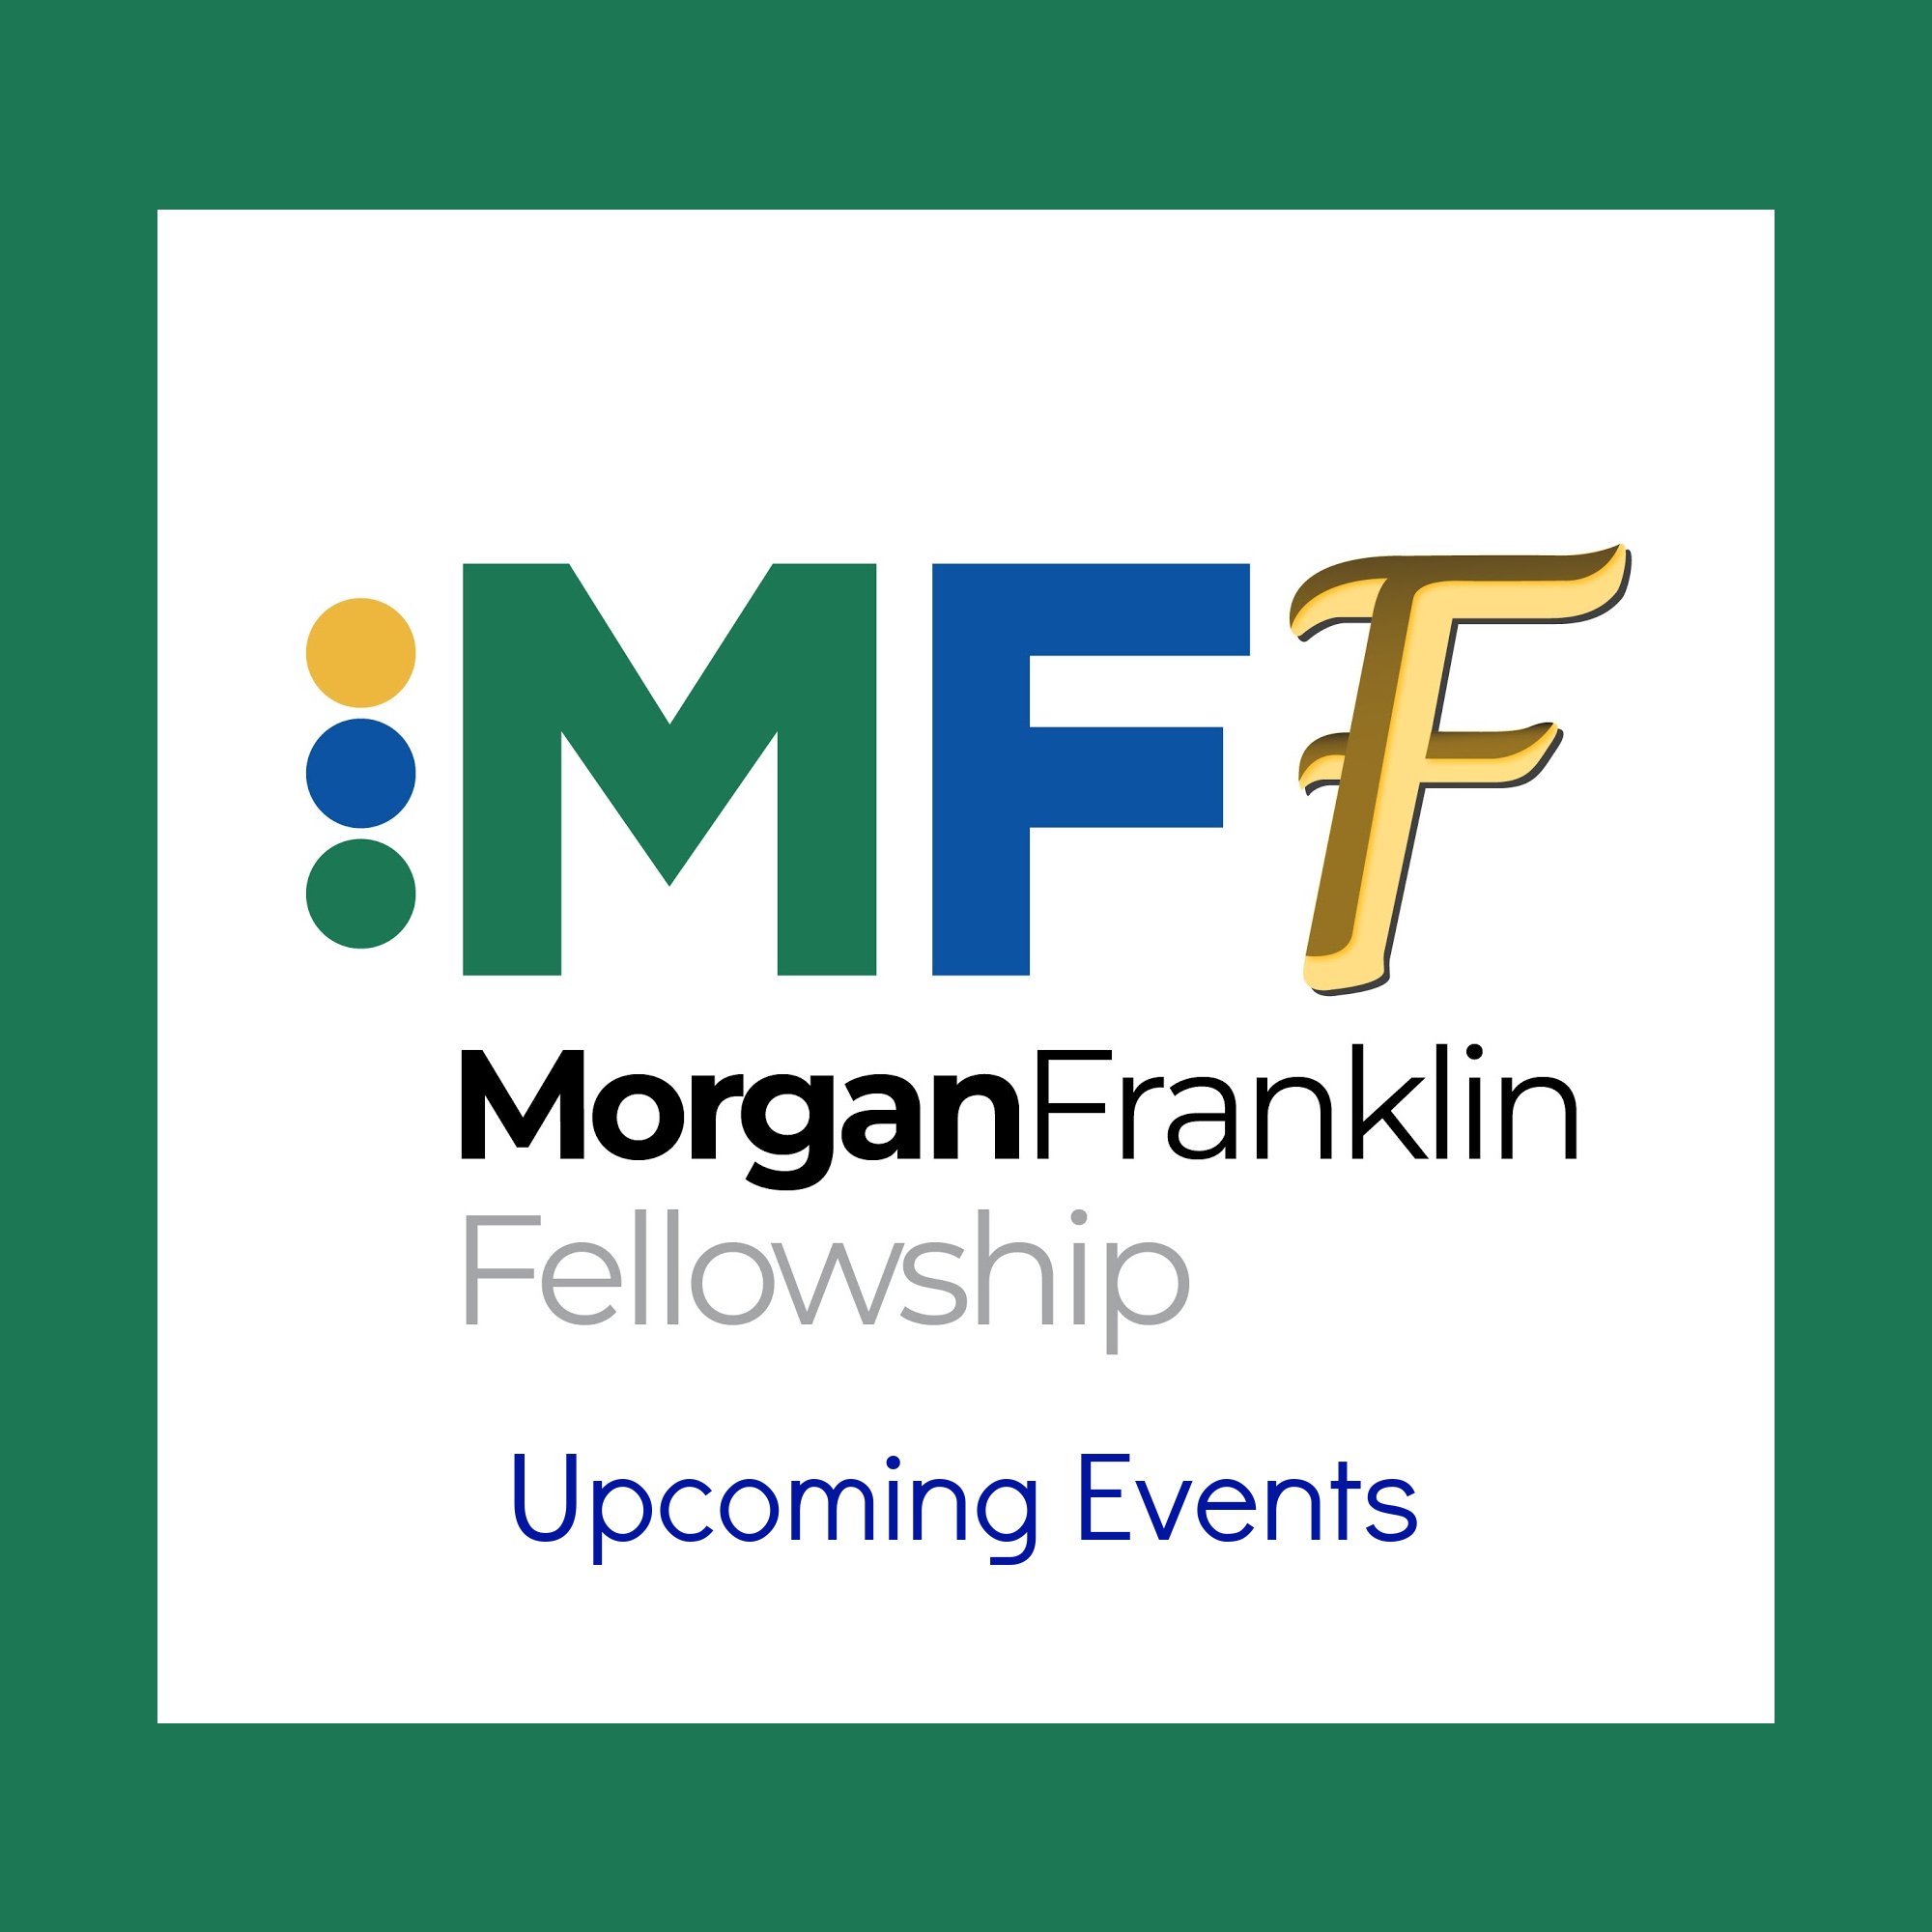 “How To Build A Simple Real Estate Pro Forma” Free Webinar Hosted By Morgan Franklin Fellowship, Tues, Jan 5th